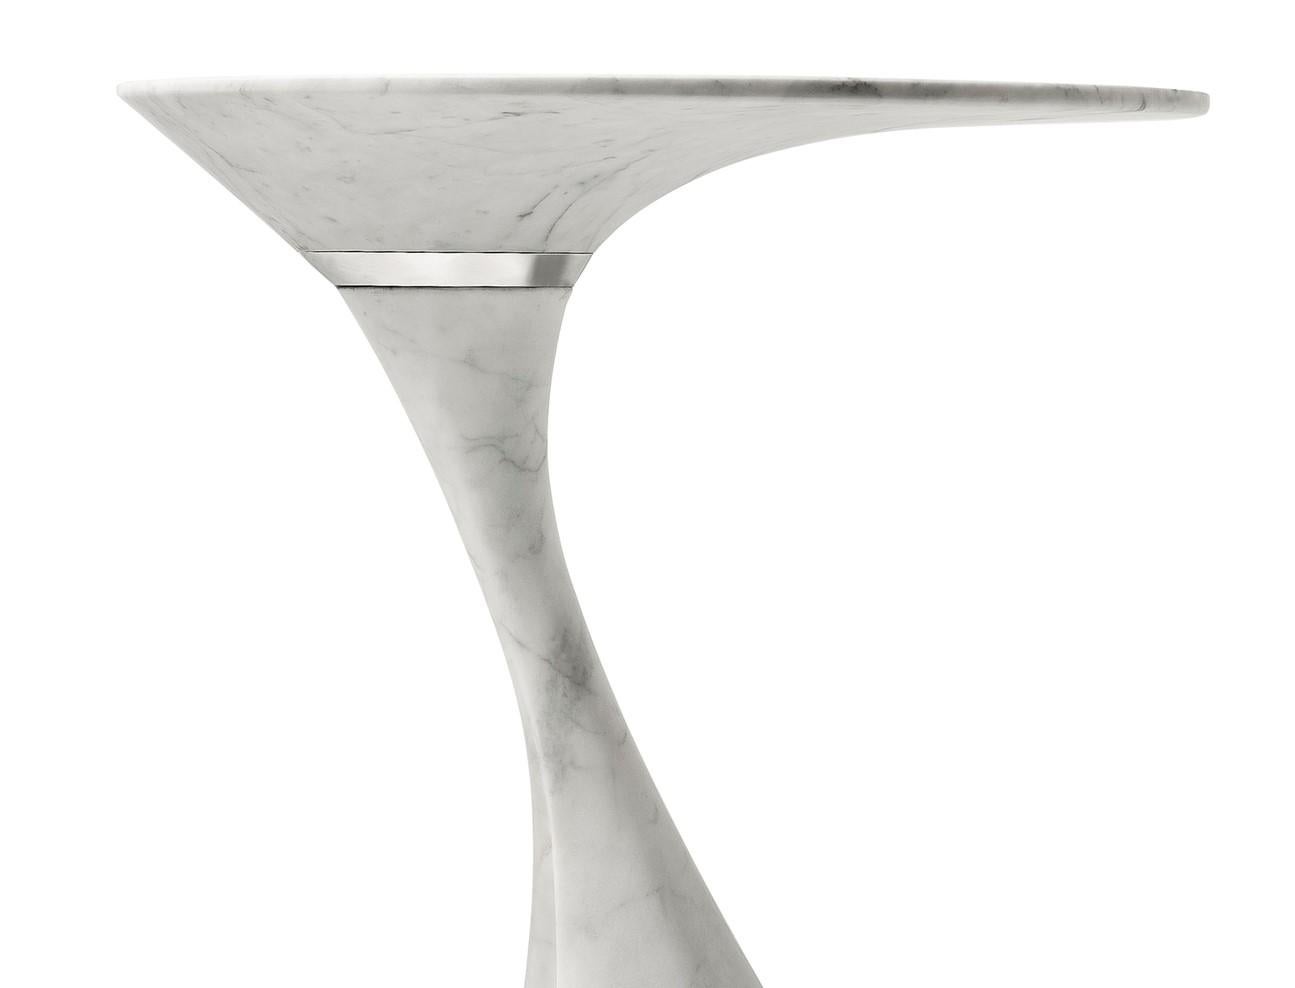 Elegant and modern, the sophisticated silhouette of this side table designed by Giuseppe Chigiotti is part of the Swan collection and evokes the elongated neck of a swan, hence the name. Either alone or displayed in a living room with the other two